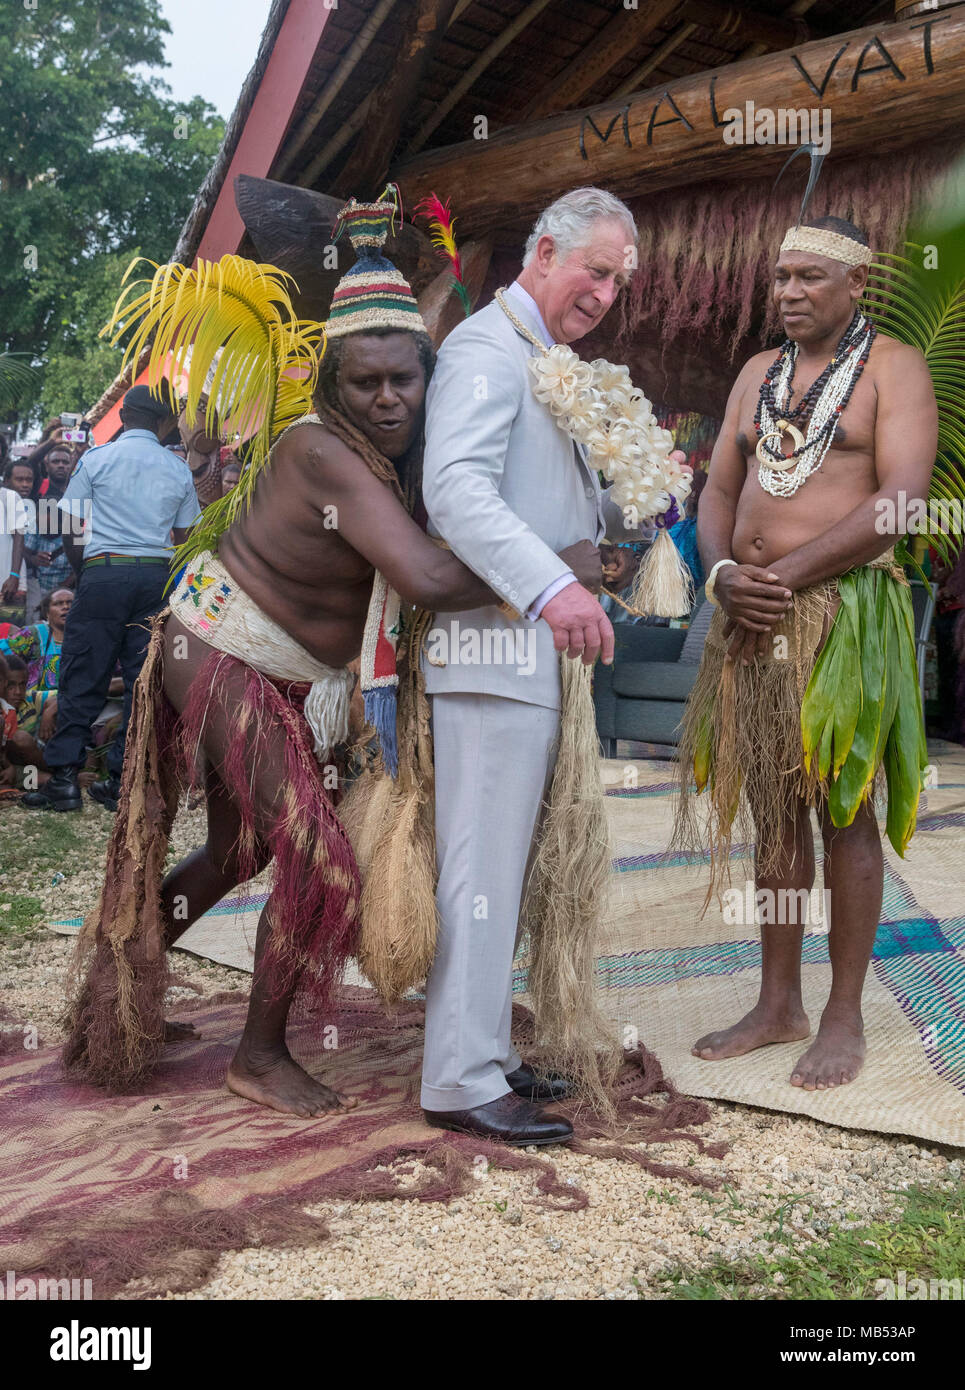 The Prince of Wales is given a grass skirt to wear prior to receiving a chiefly title during a visit to the Chiefs' Nakamal, as he visits the South Pacific island of Vanuatu during his tour of the region. Stock Photo